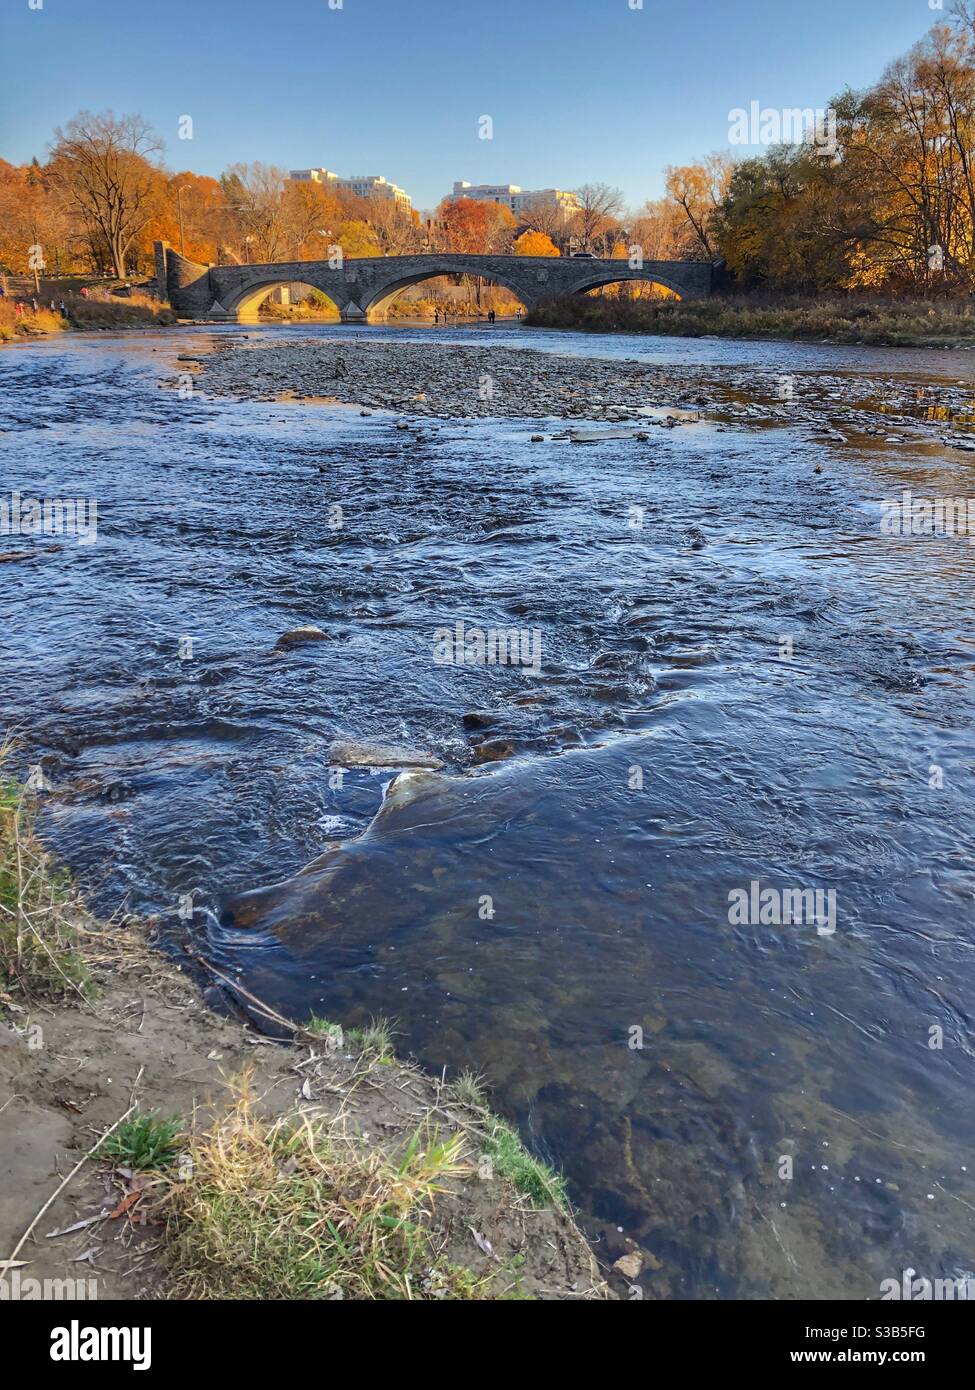 The Humber River in Toronto, Canada, on a beautiful autumn day. Stock Photo